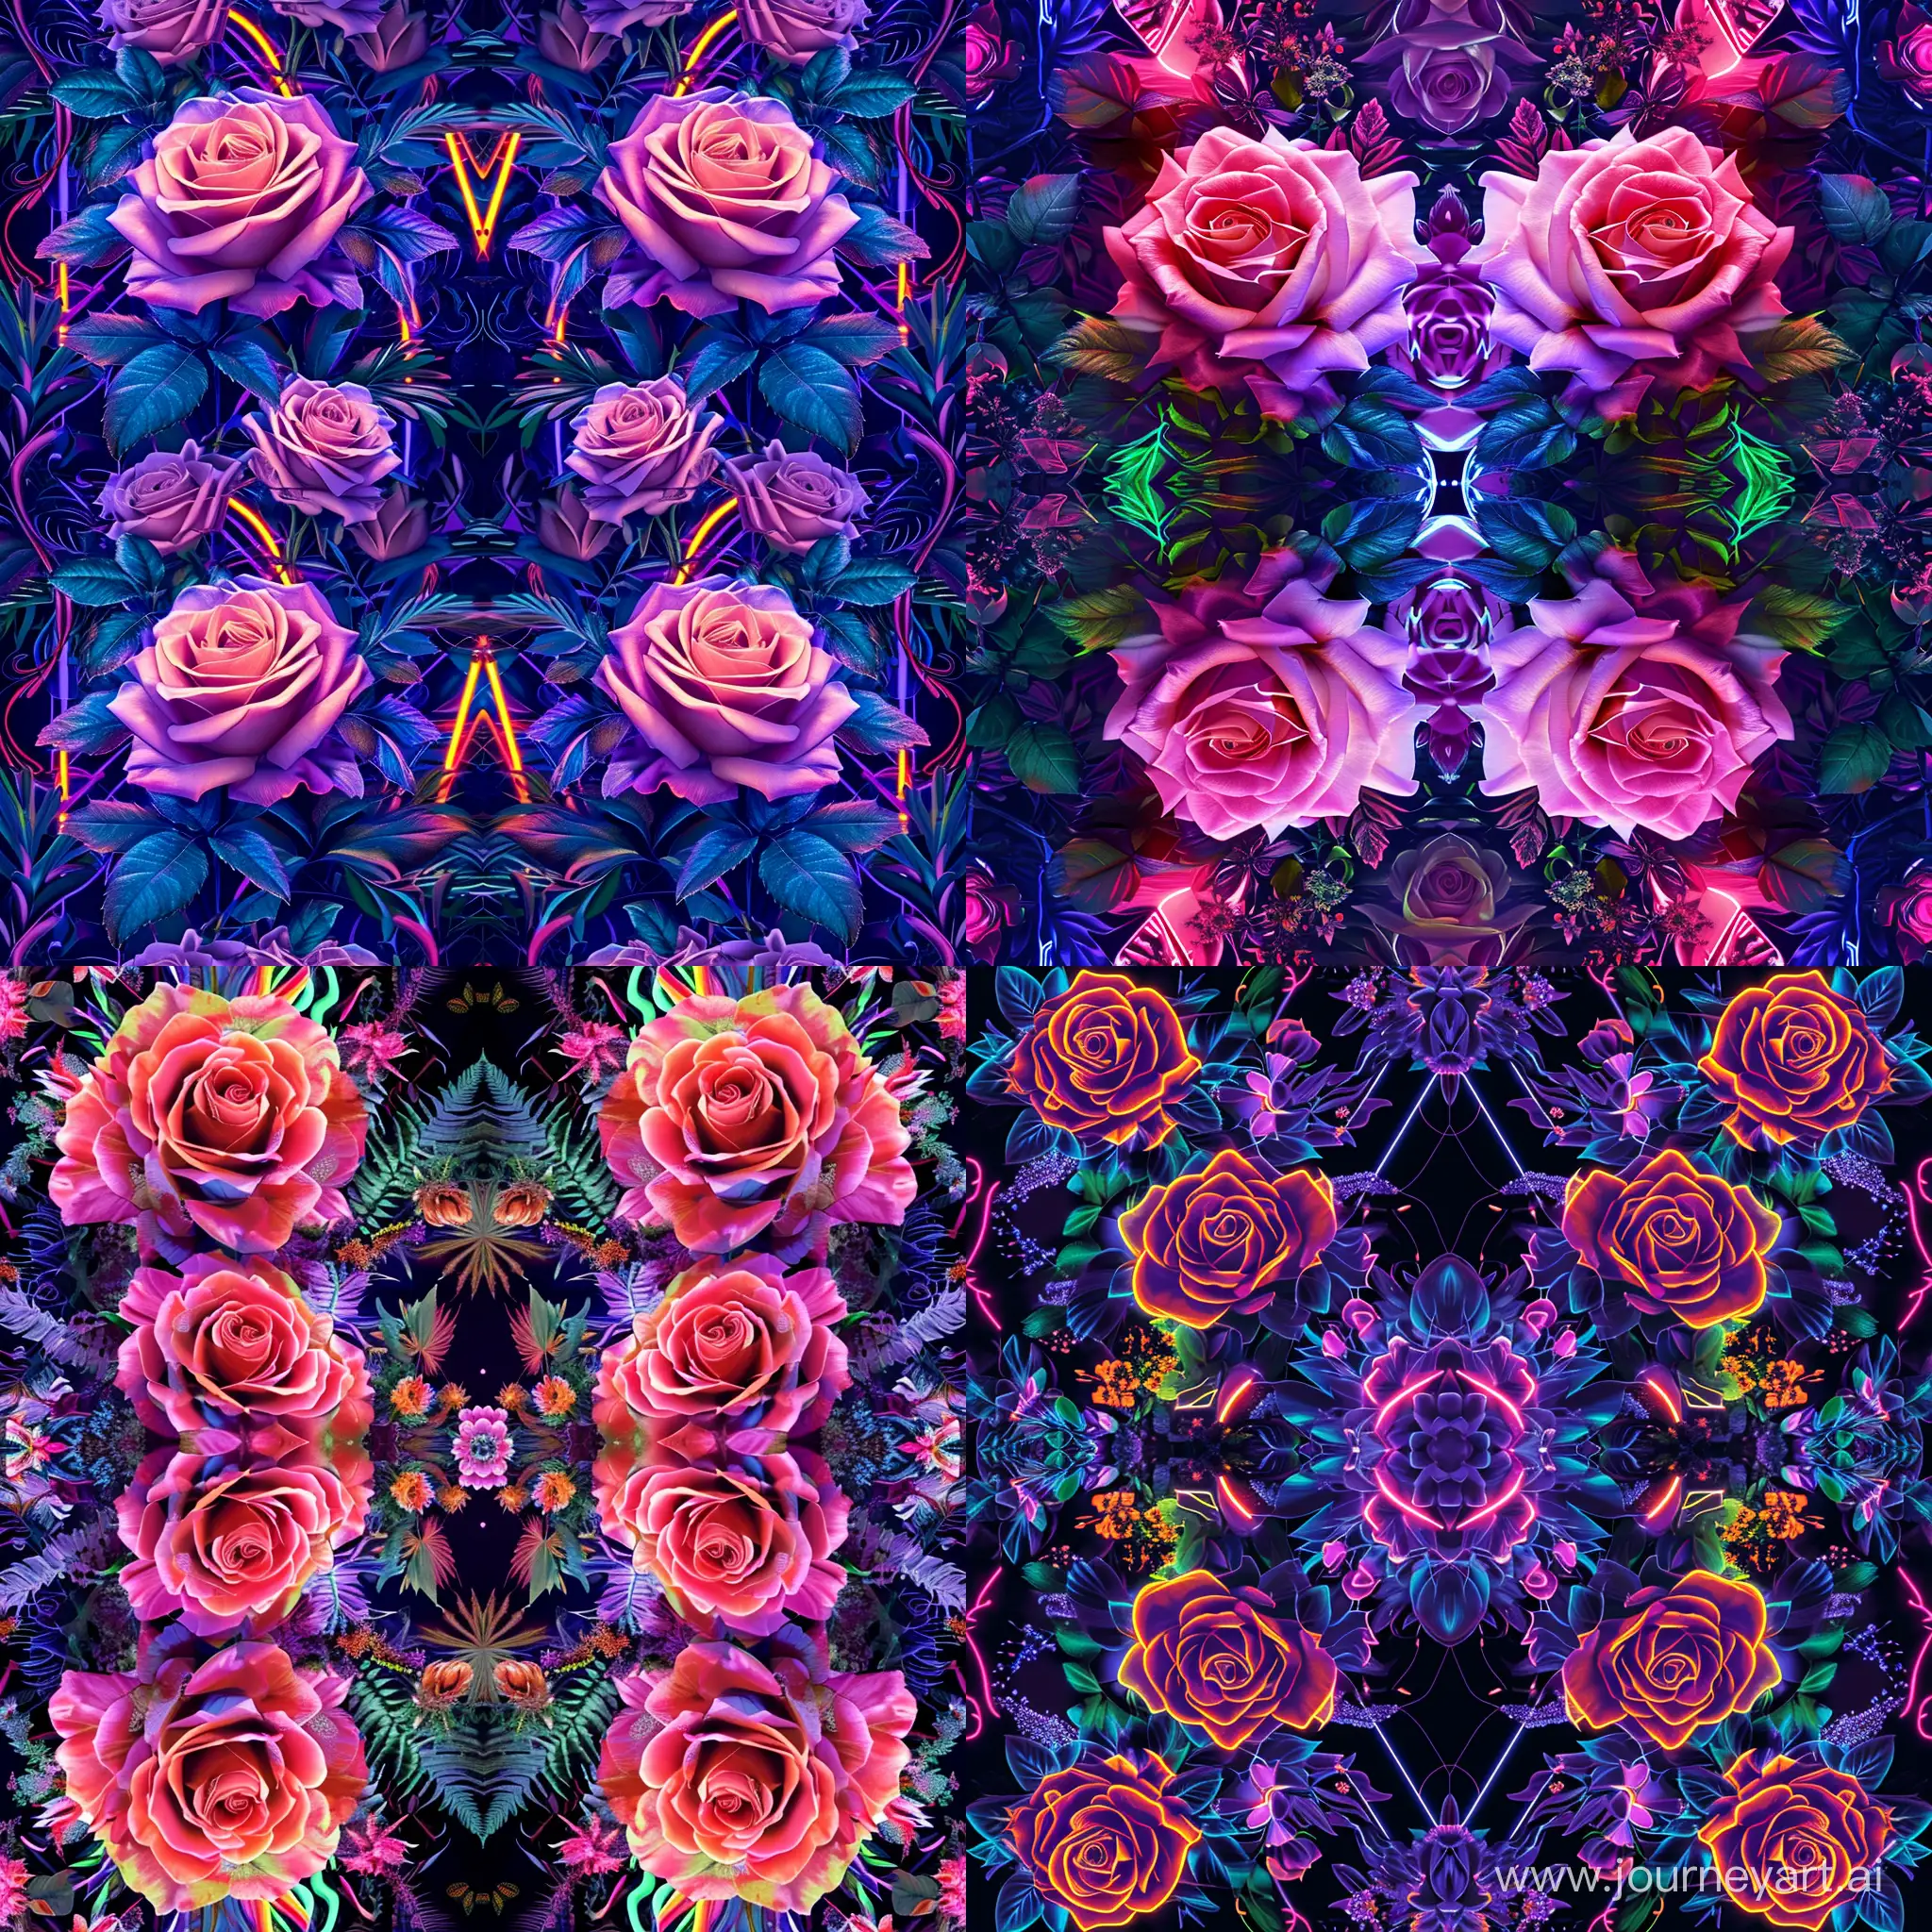 repeating pattern art for textiles with perfect symmetrical roses and plants with  80s retro contrasting neon color pallette in a repeating pattern arrangement in the style of  emmanuele dascanio, Roberto Giavarini, 4k, hyper-realism, radiant image